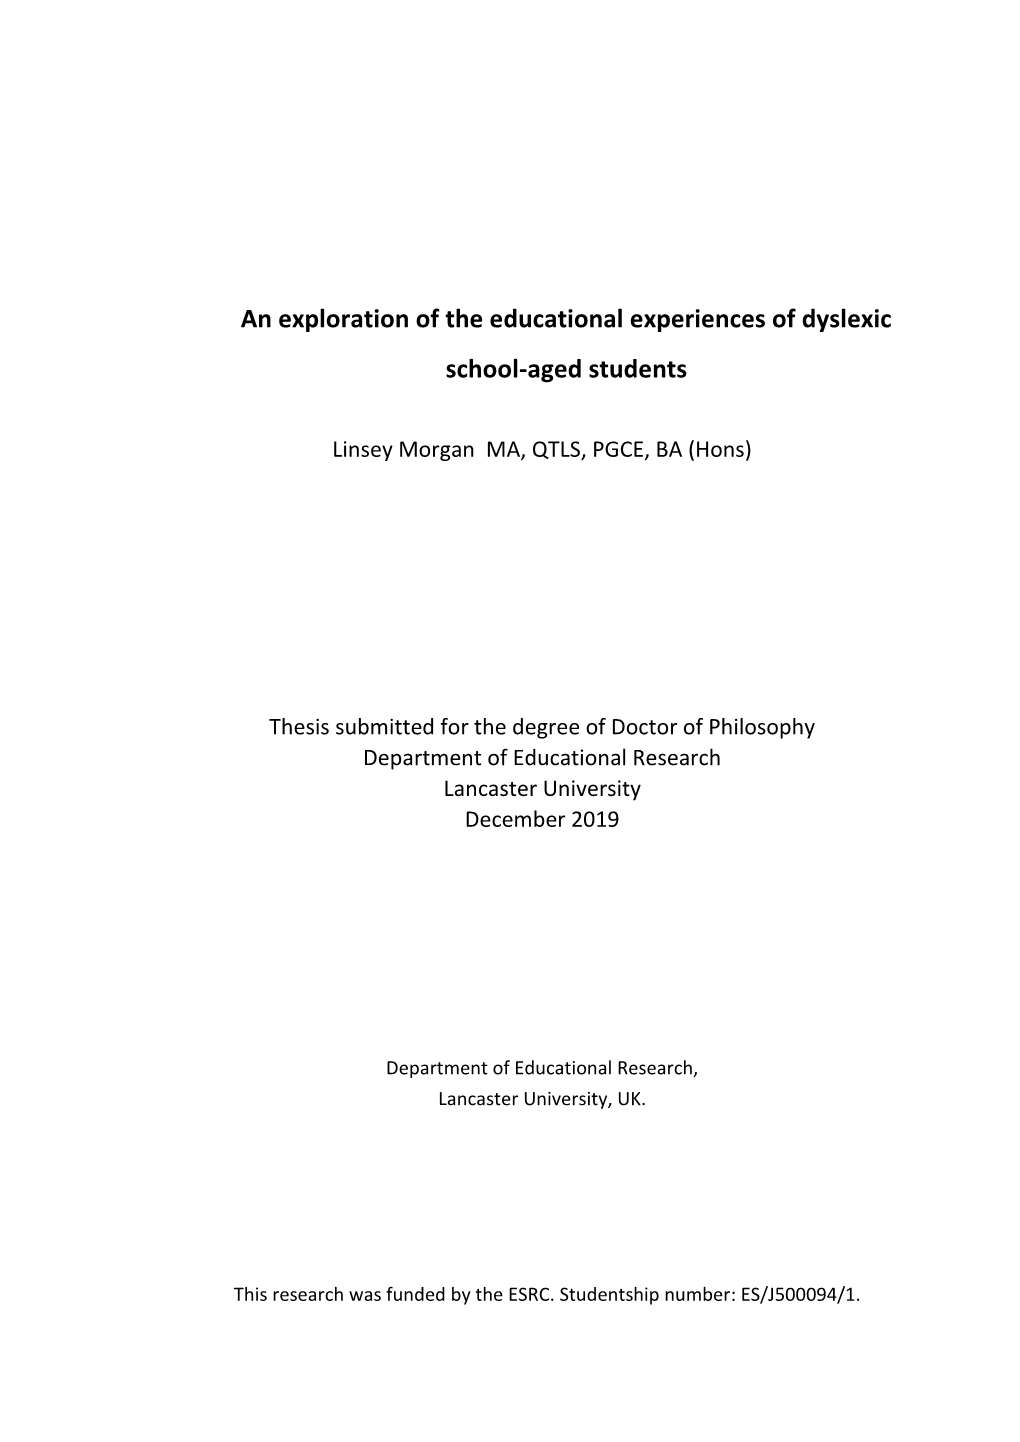 An Exploration of the Educational Experiences of Dyslexic School-Aged Students